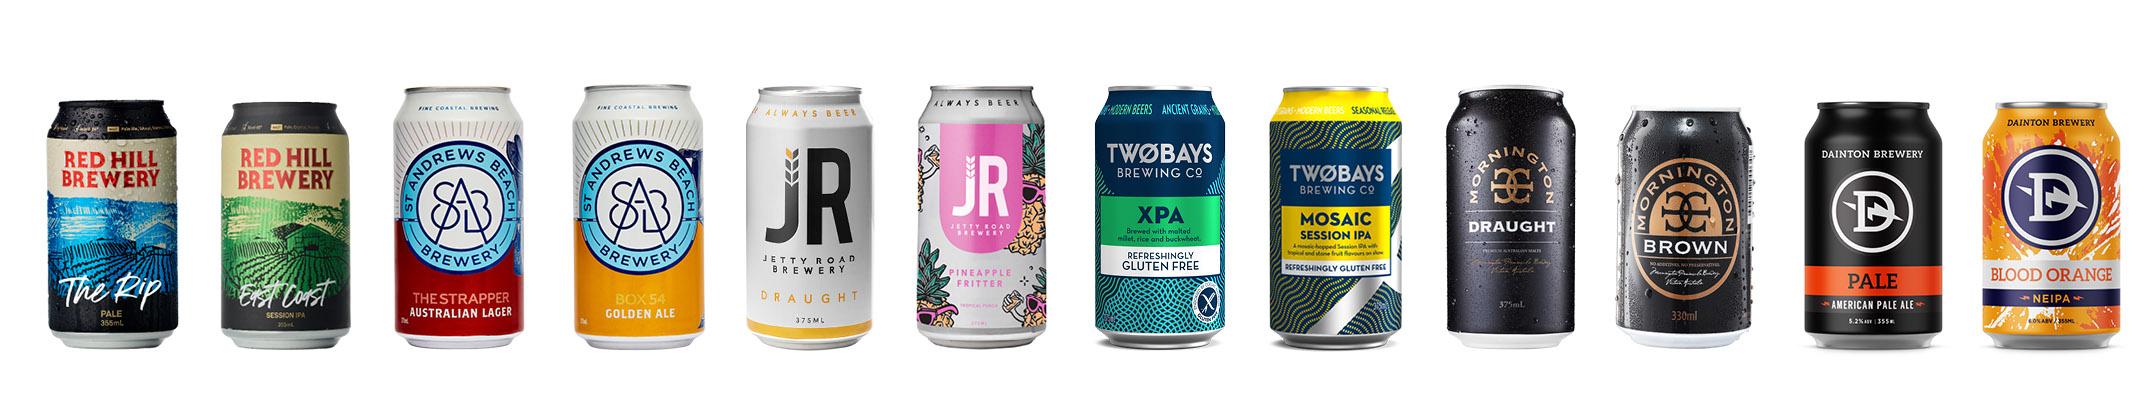 Selection of Beach Box beers